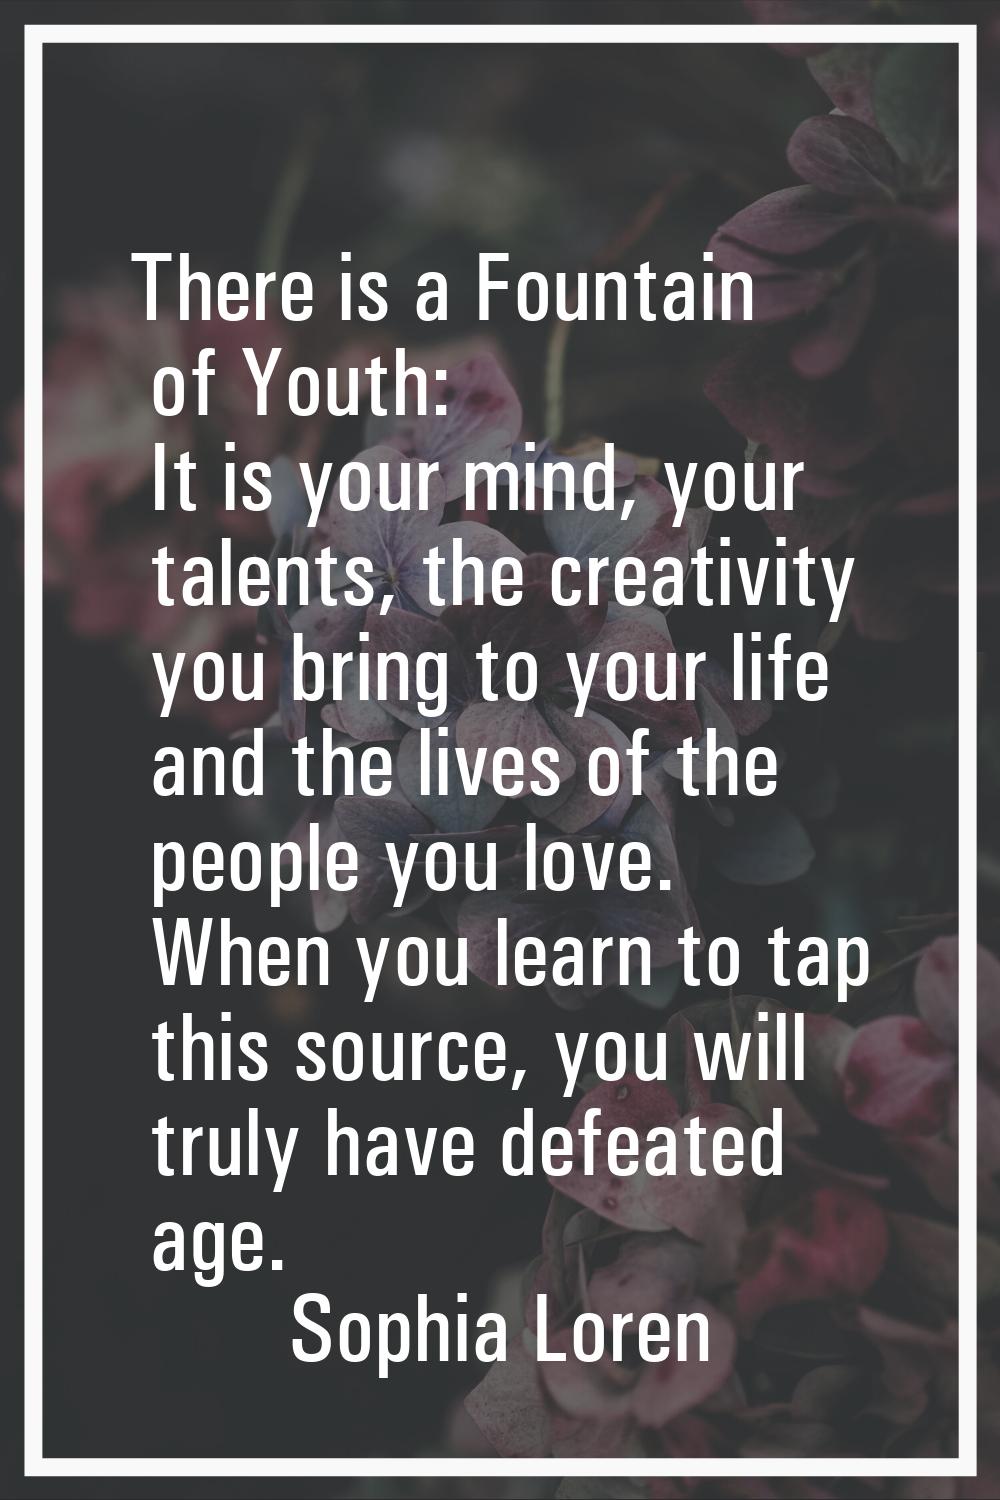 There is a Fountain of Youth: It is your mind, your talents, the creativity you bring to your life 